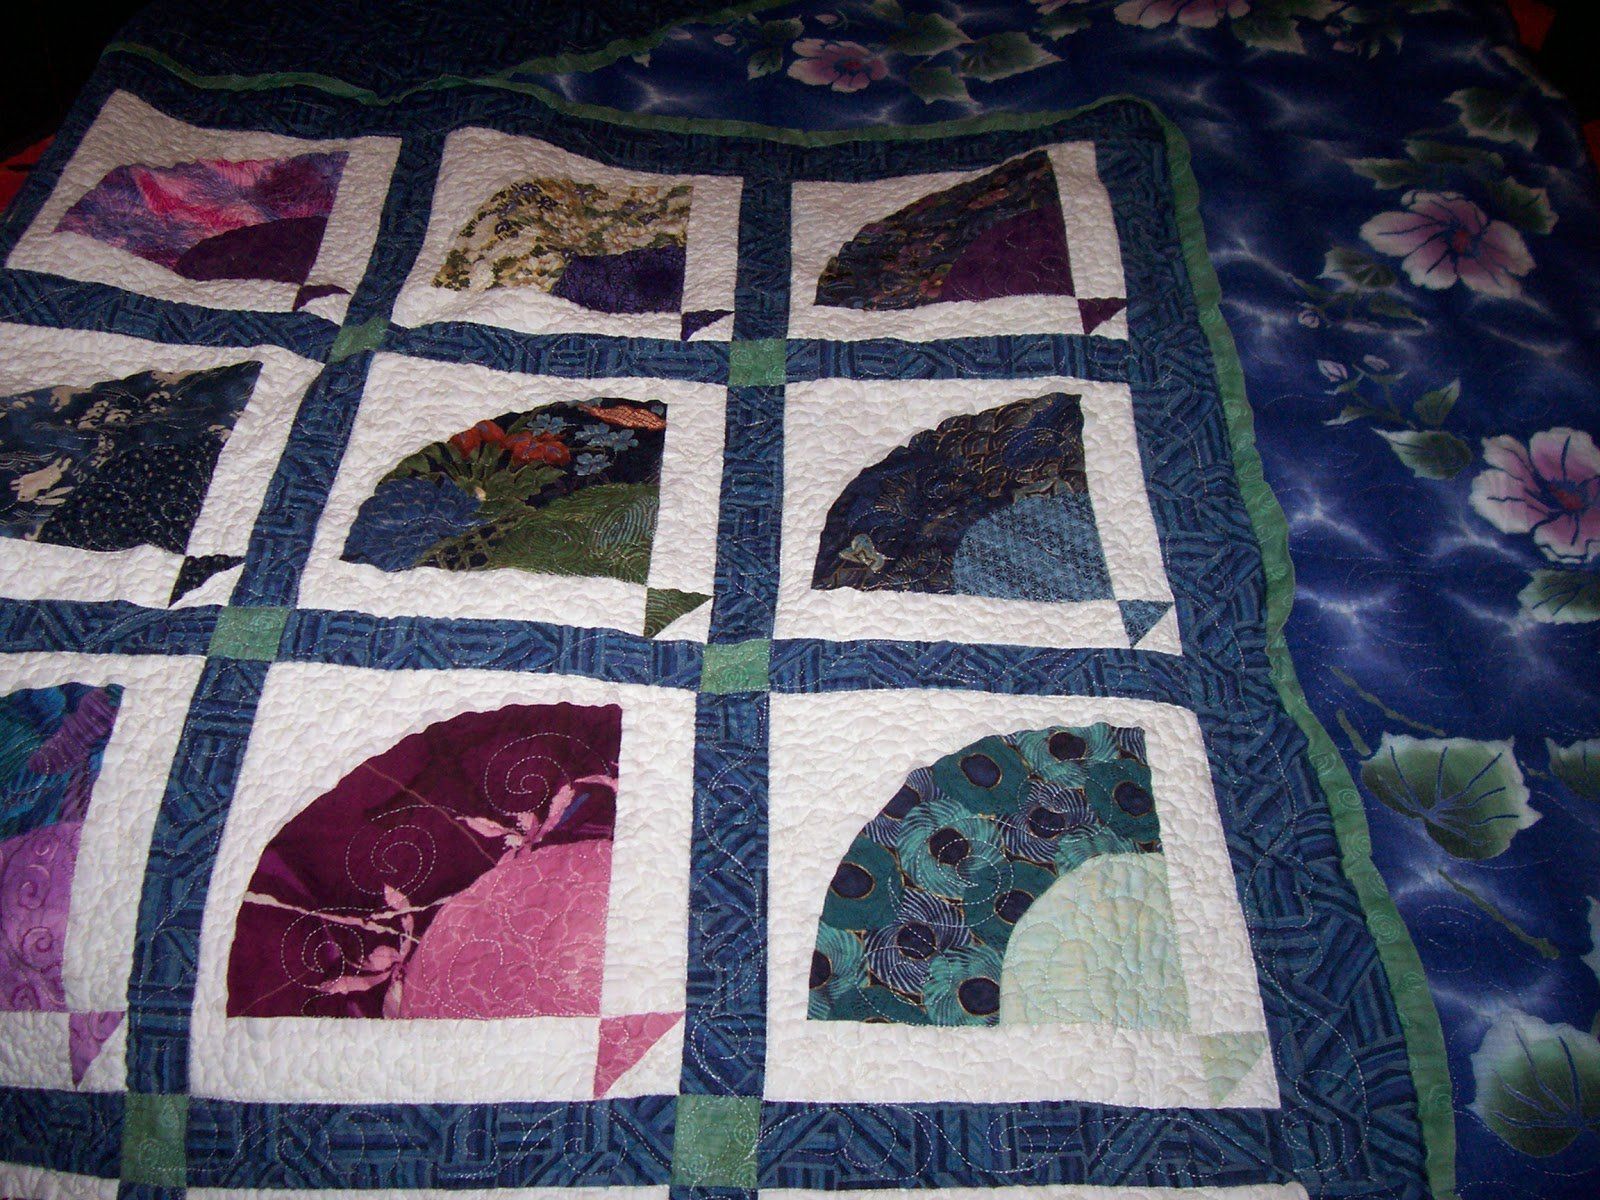 Lock S. reccomend Asian or japanese quilt borders